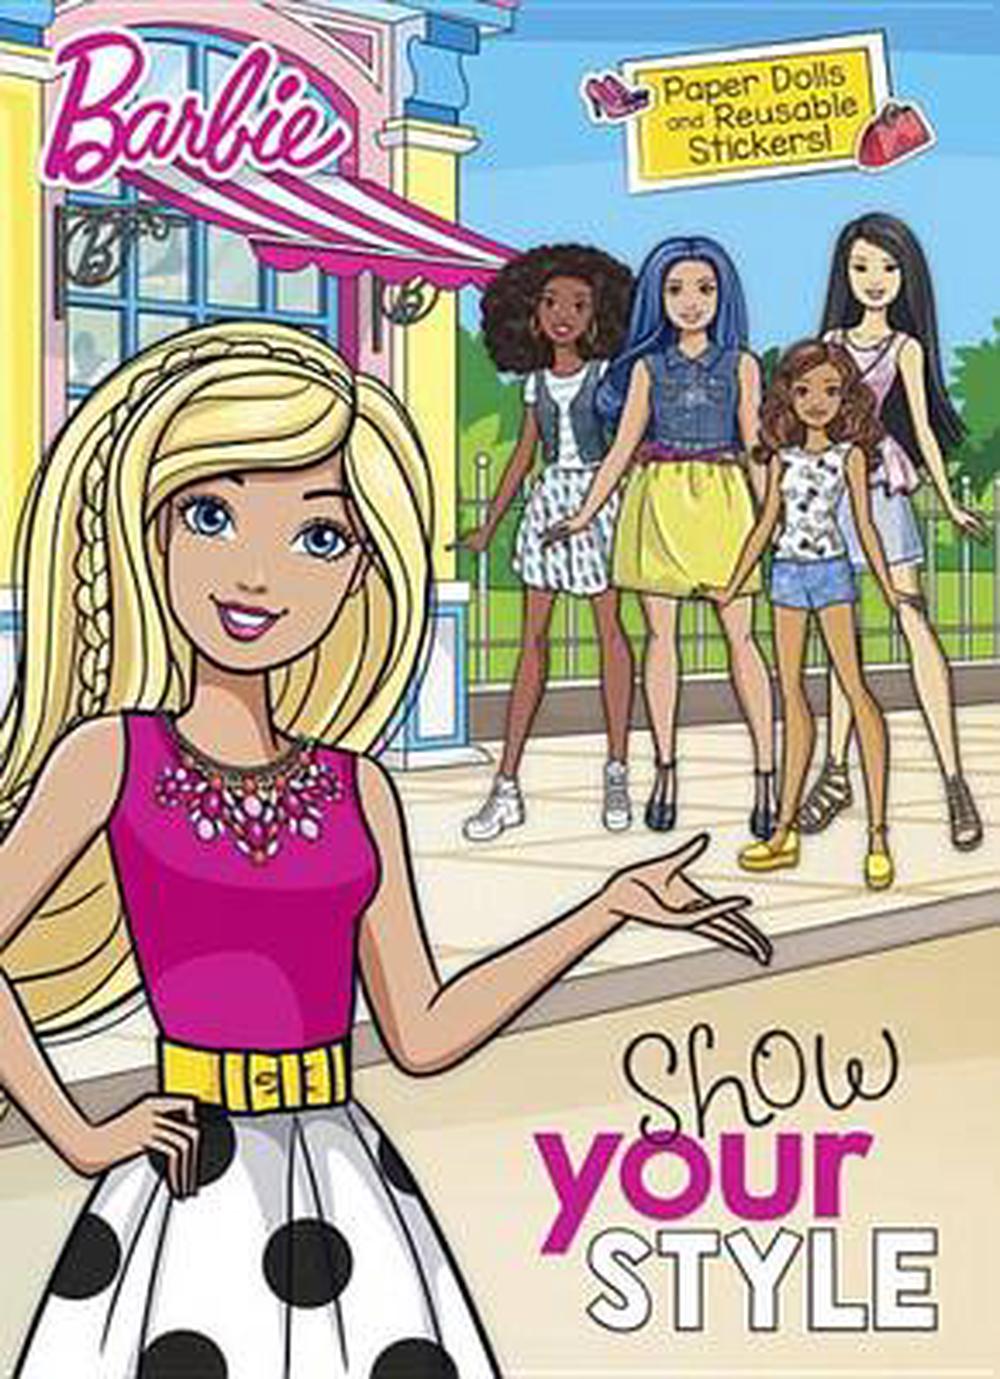 Show Your Style (Barbie) by Golden Books (English) Paperback Book Free ...